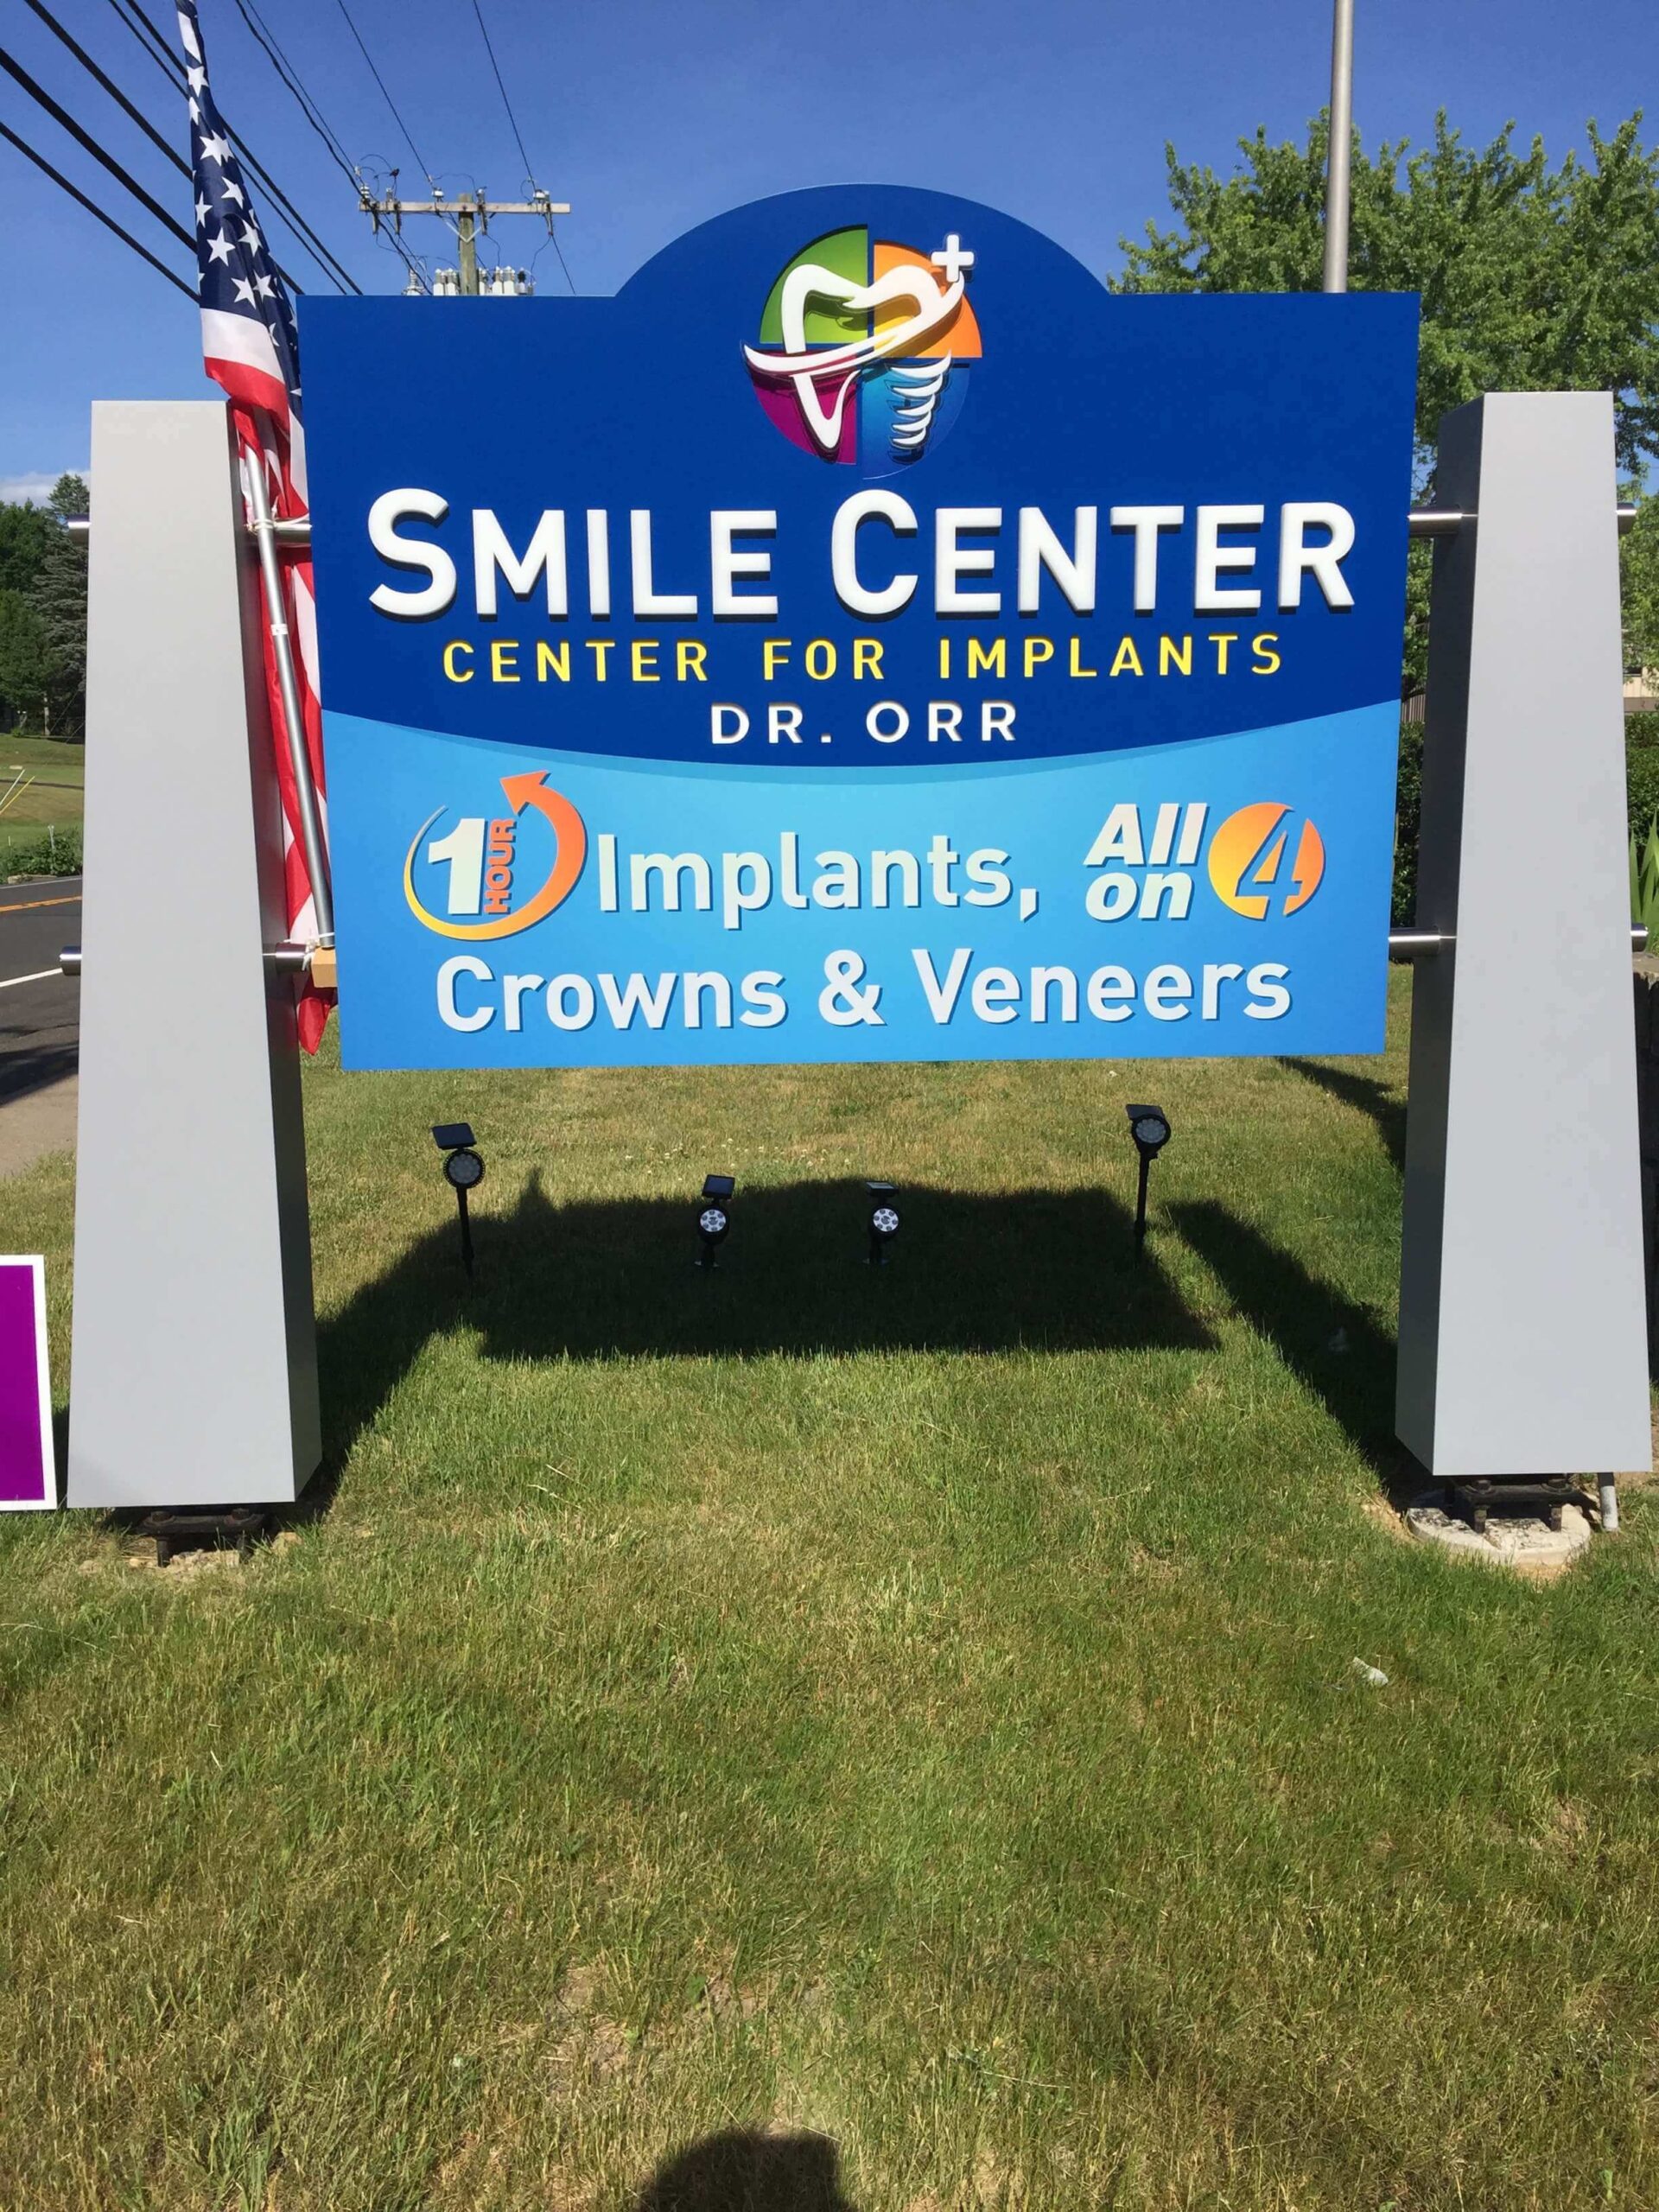 Dental Services at Smile Center CT - About Us